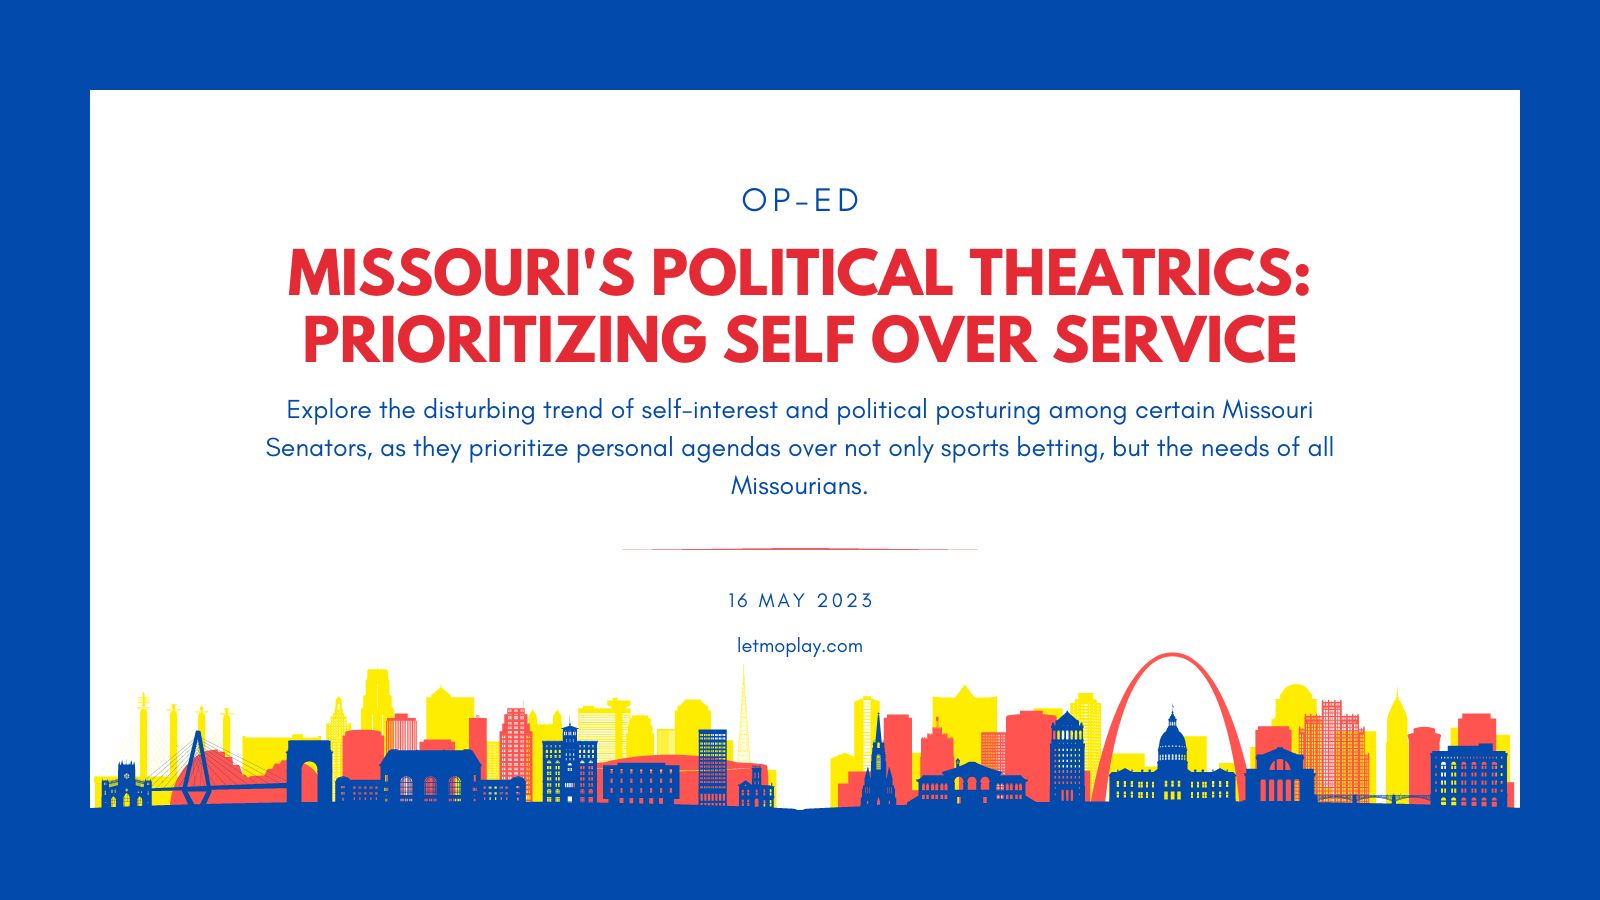 Politcal theatre creative with the title in red text and the description in small blue text. The border is a thick blue and at the bottom has a colored skyline of Kansas City on the left and Saint Louis on the right.